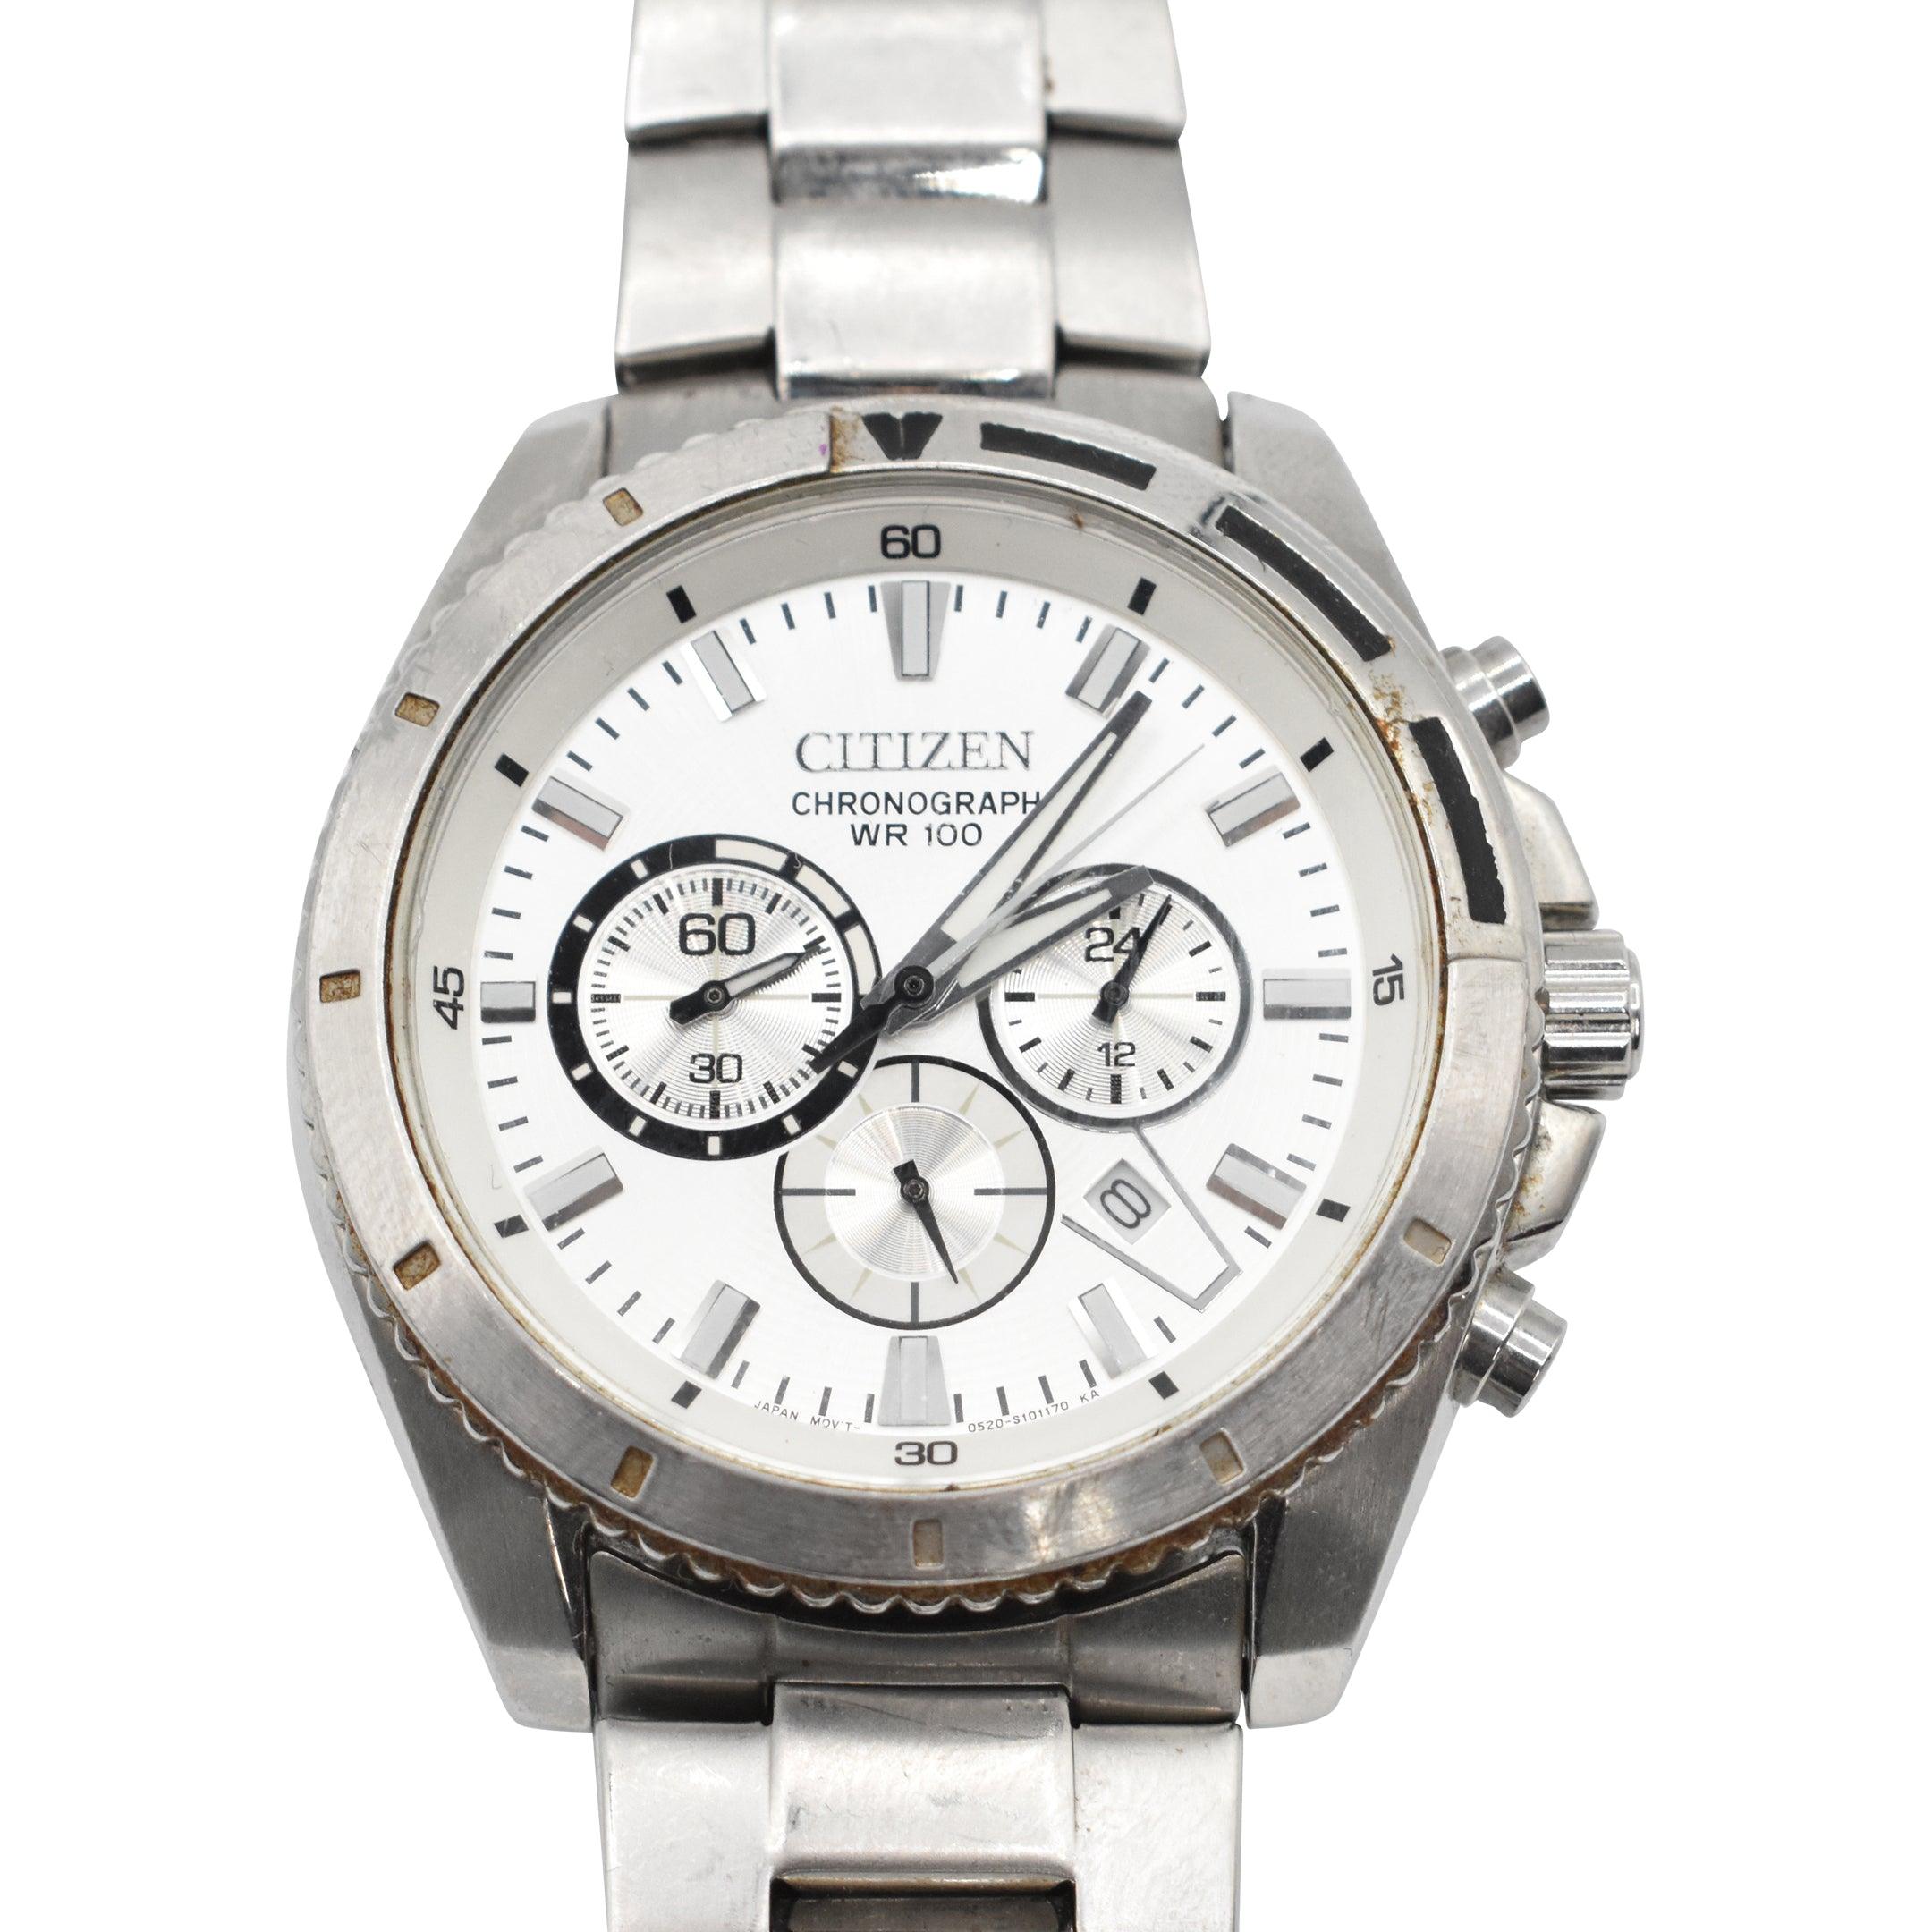 Citizen 'Chronograph WR 100' Watch - Fashionably Yours